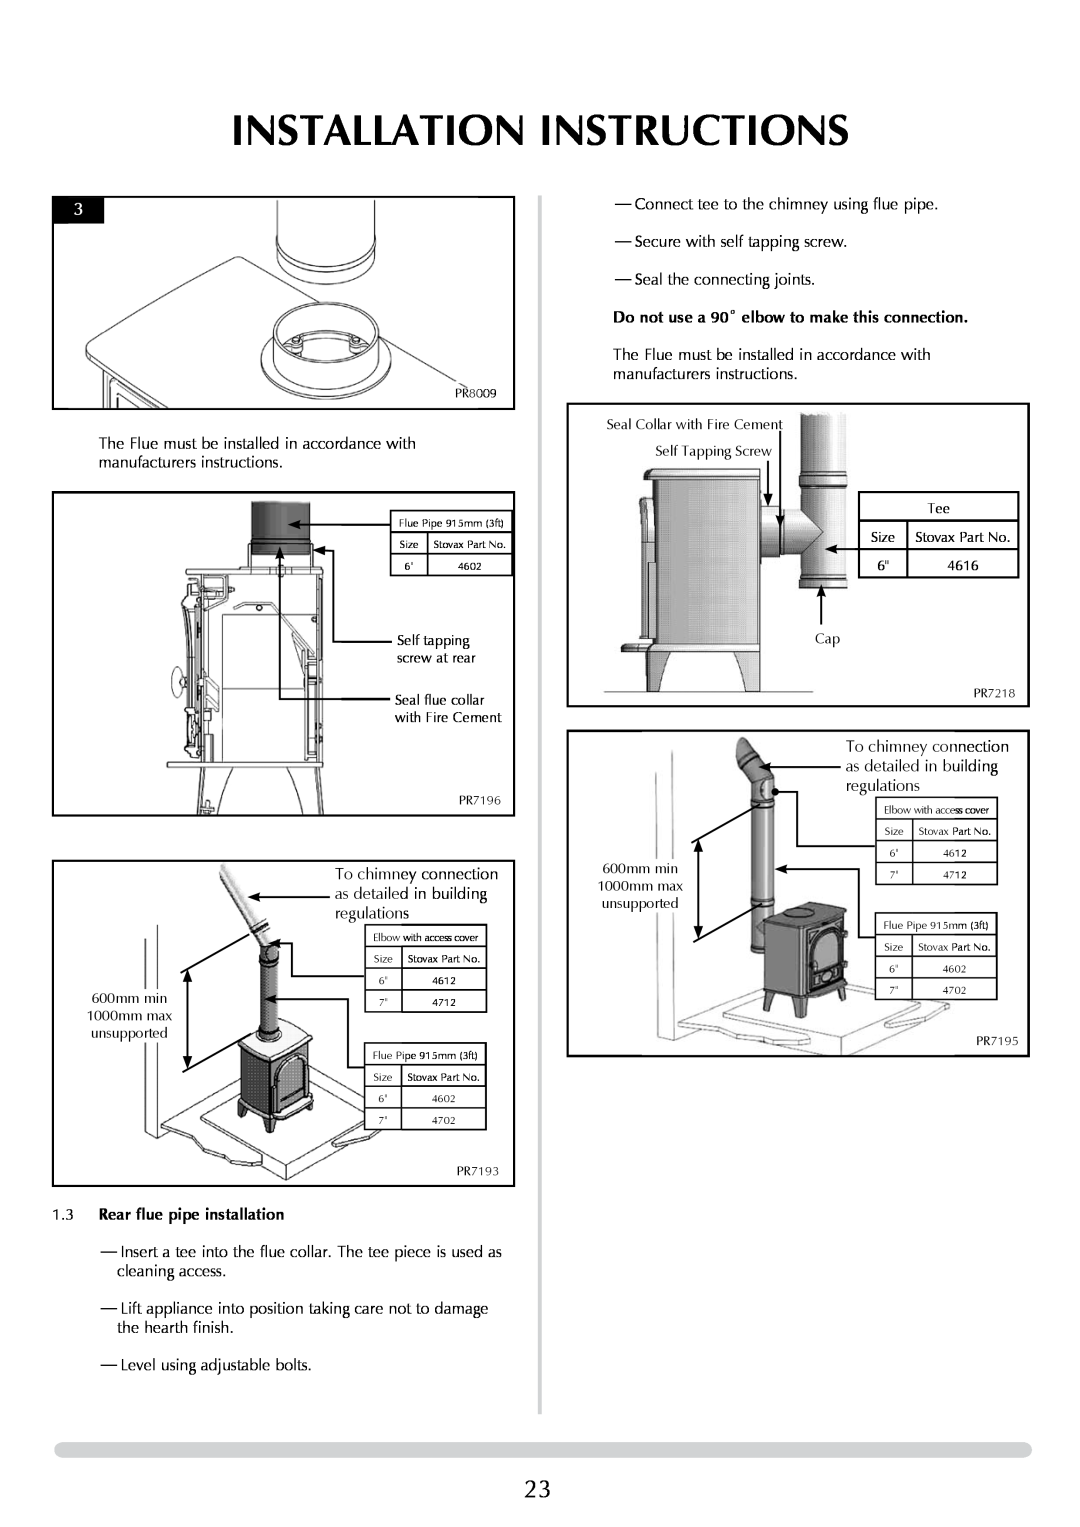 Yeoman DEVON 50 Installation Instructions, Do not use a 90˚ elbow to make this connection, 1.3Rear flue pipe installation 